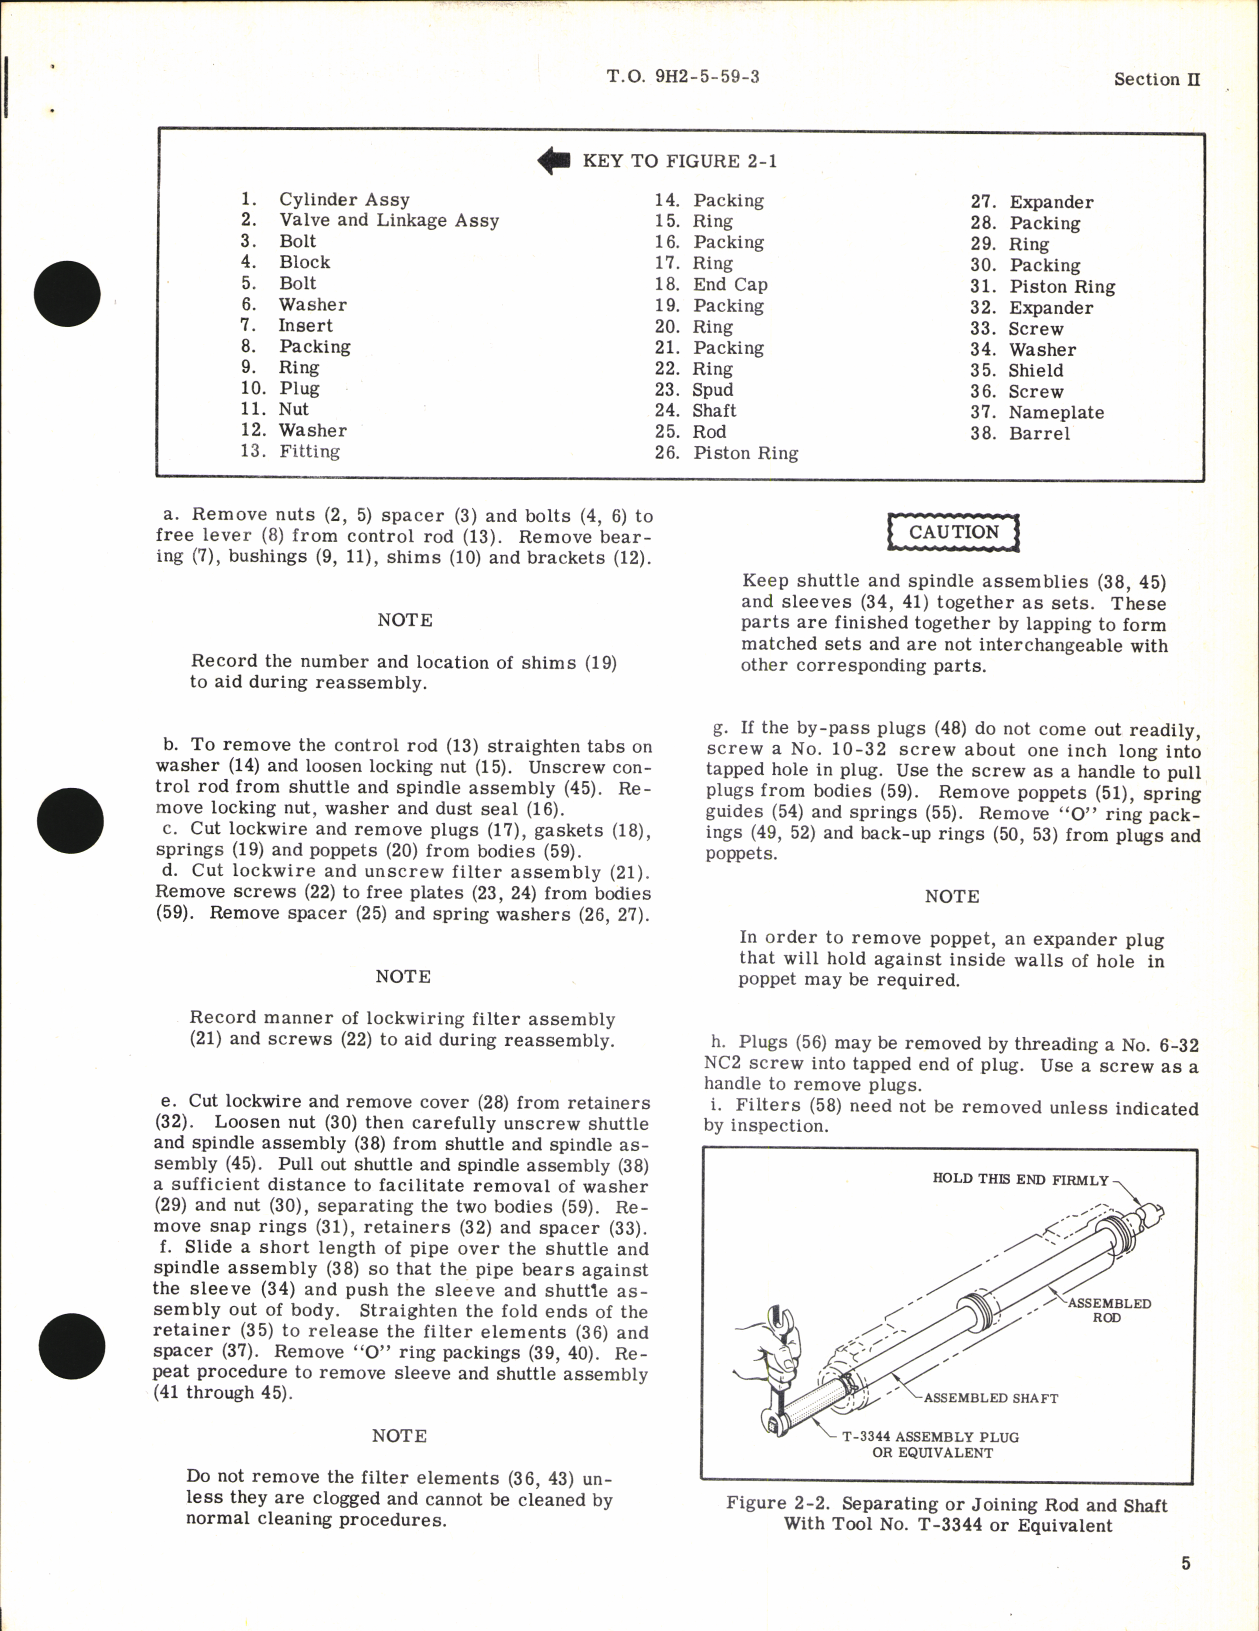 Sample page 7 from AirCorps Library document: Overhaul Instructions for Hydraulic Tandem power cylinder Part No. 11590-6